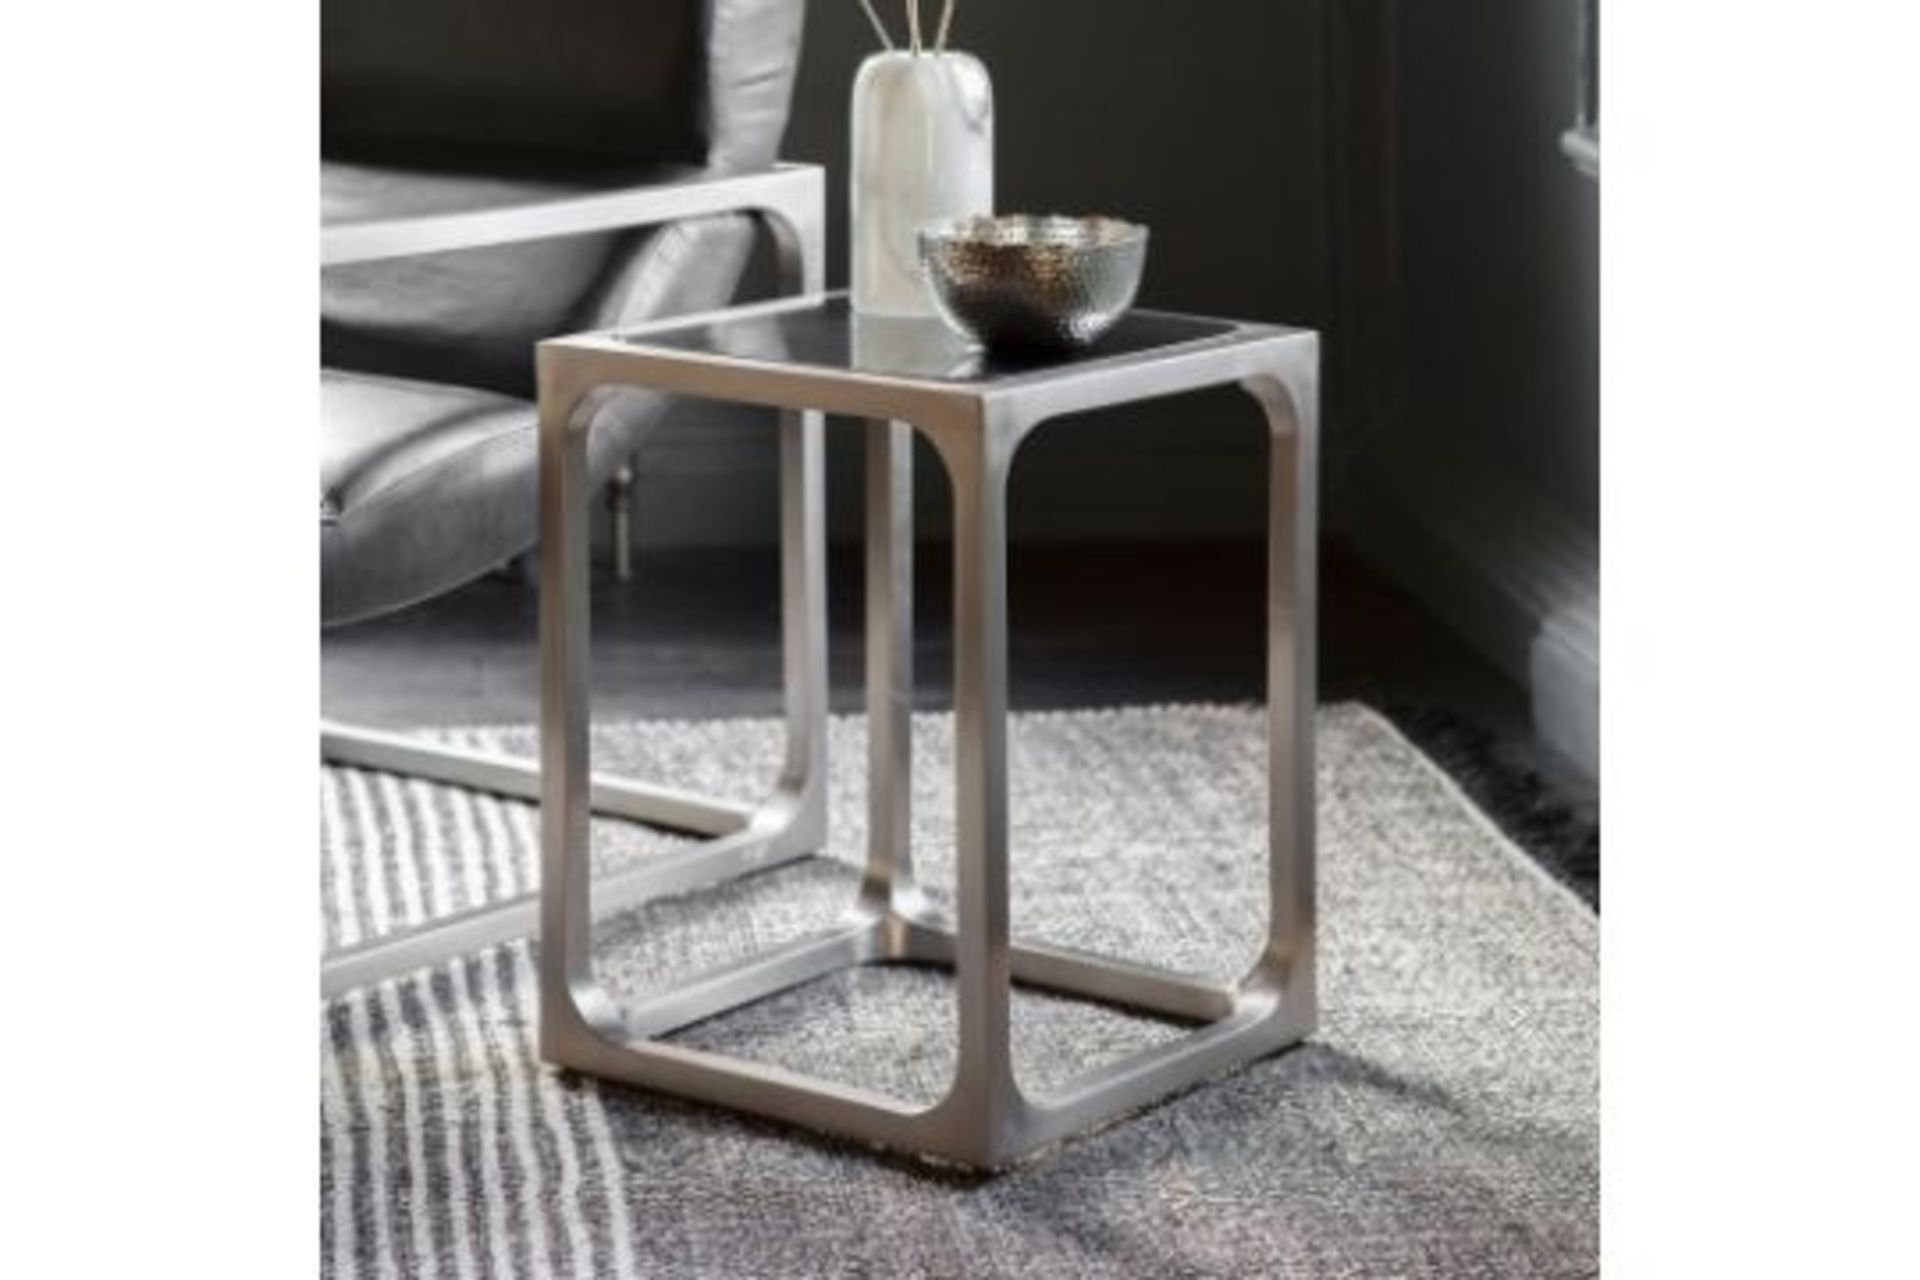 Roma Side Table In Pewter Is A Visually Arresting Piece That Is Perfect For Any Room If You Want